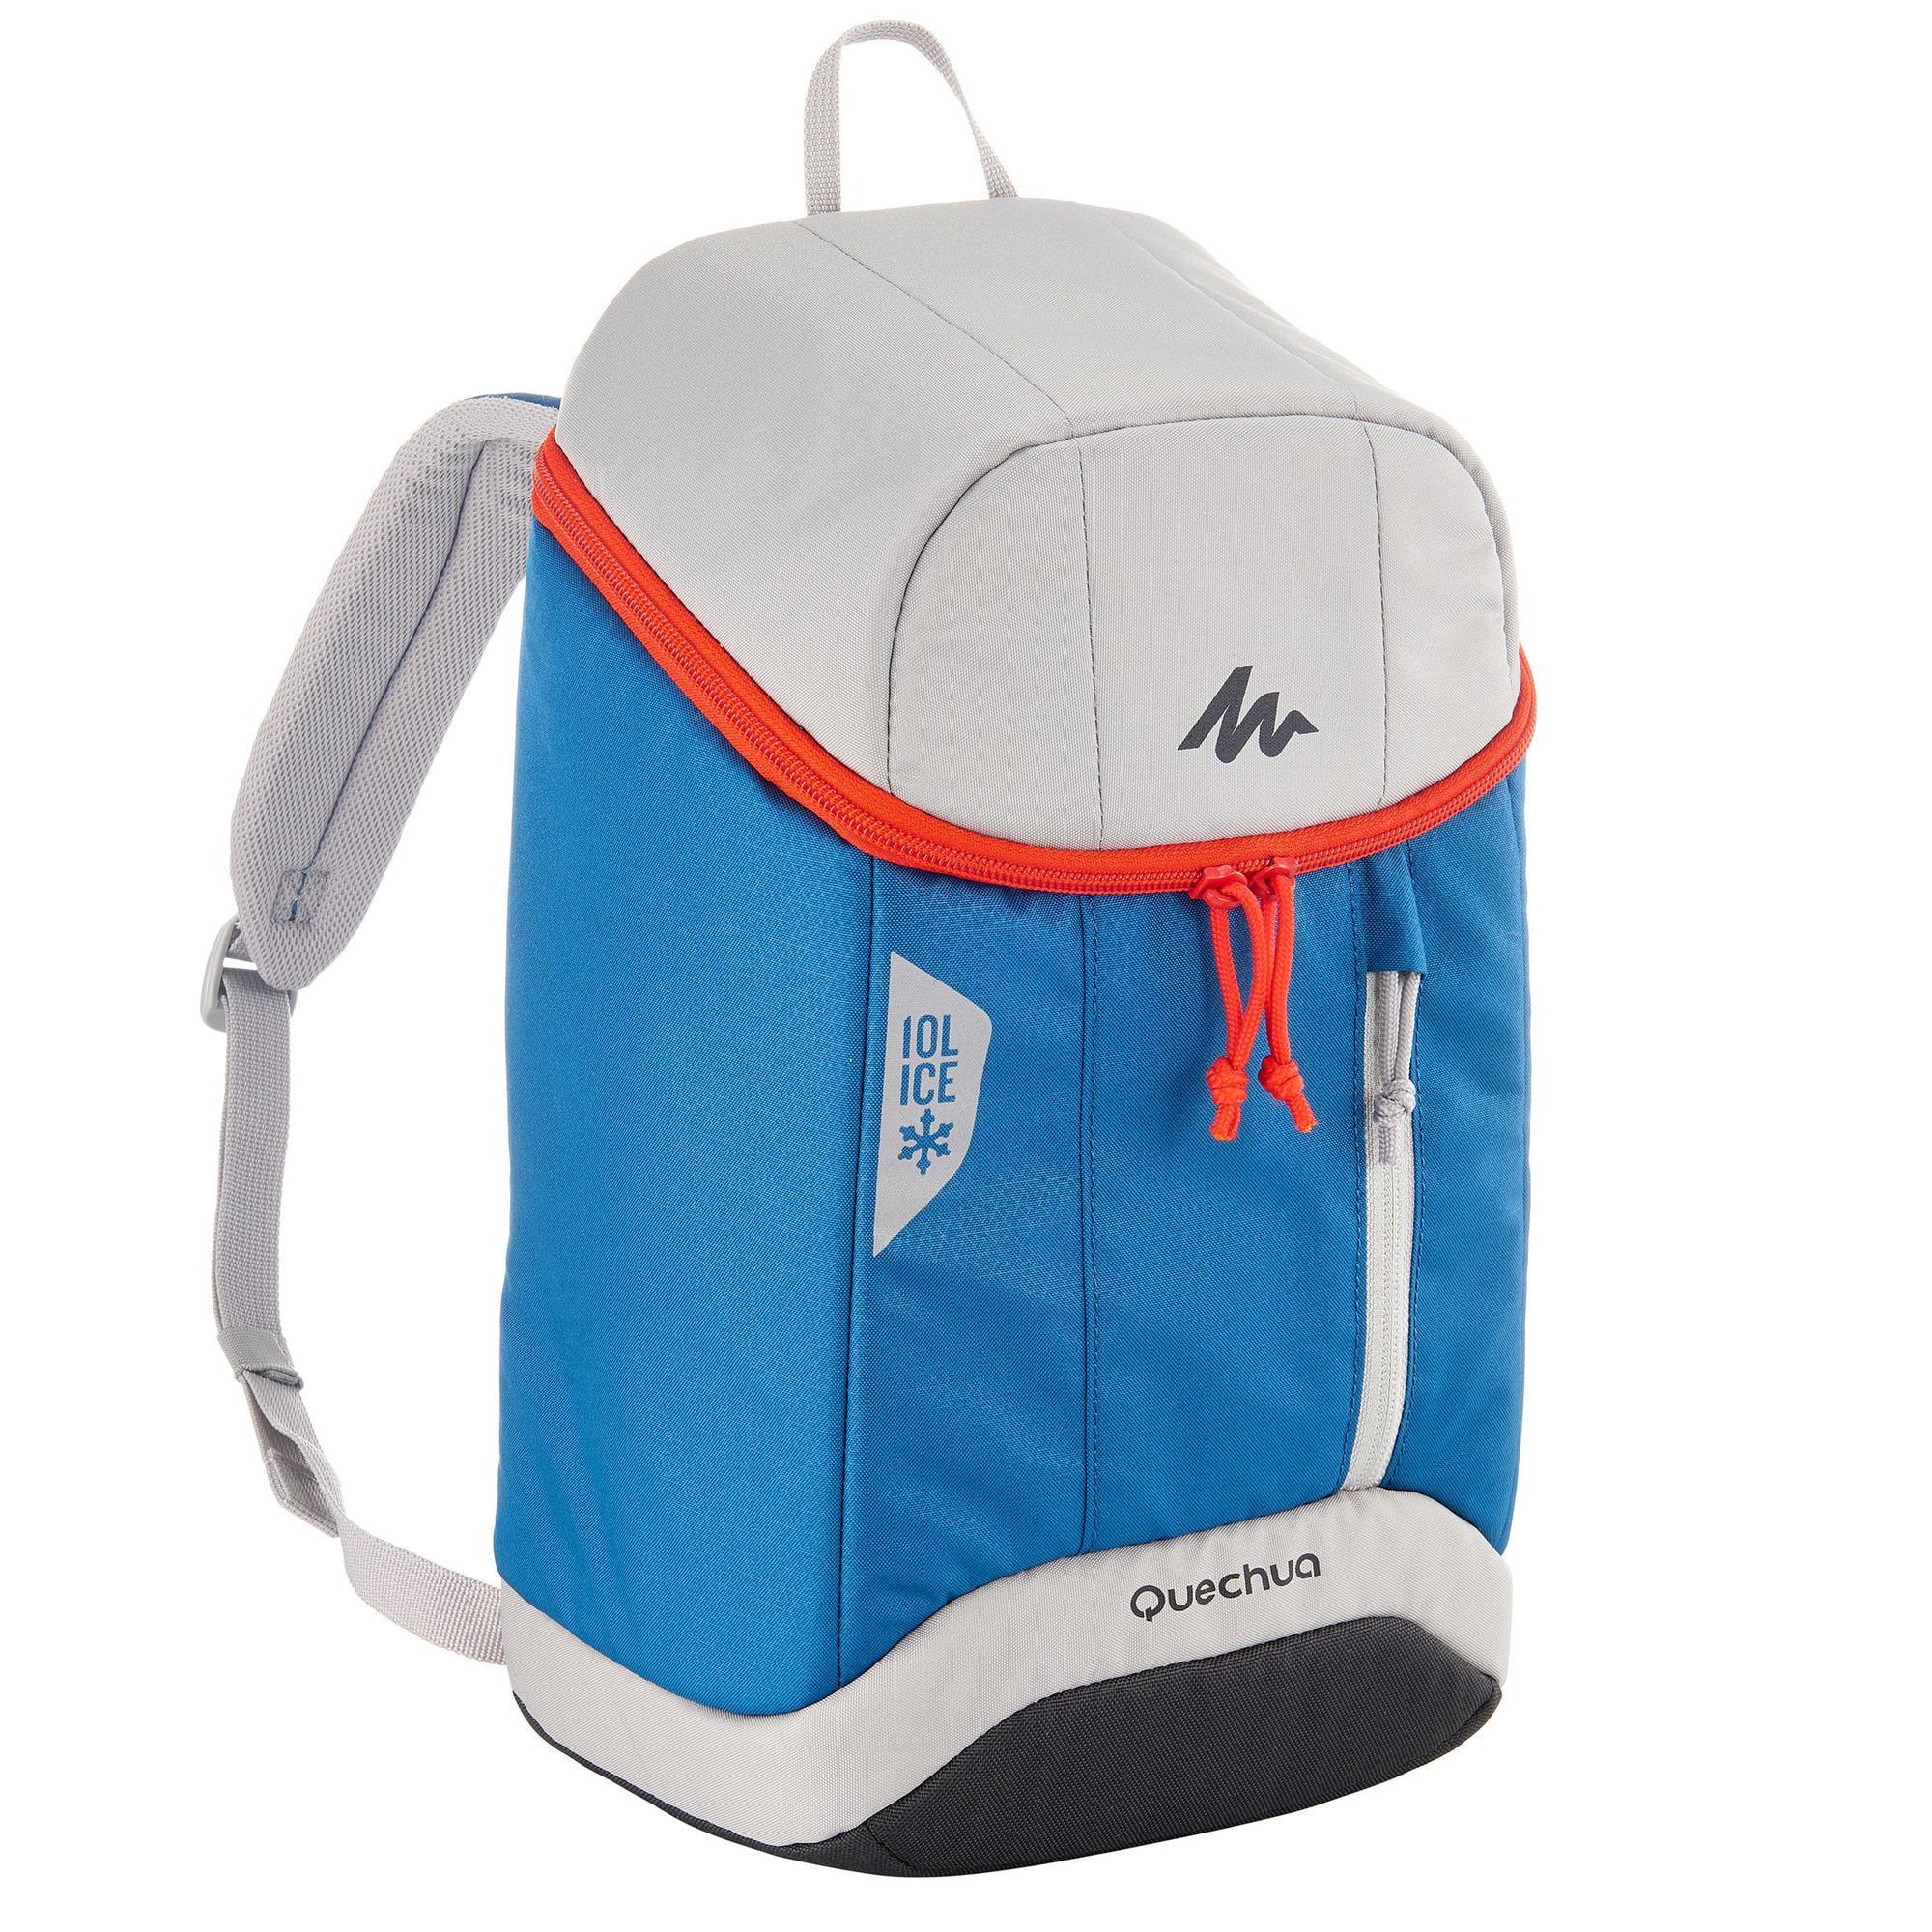 BACKPACK COOLER FOR CAMPING AND HIKING 